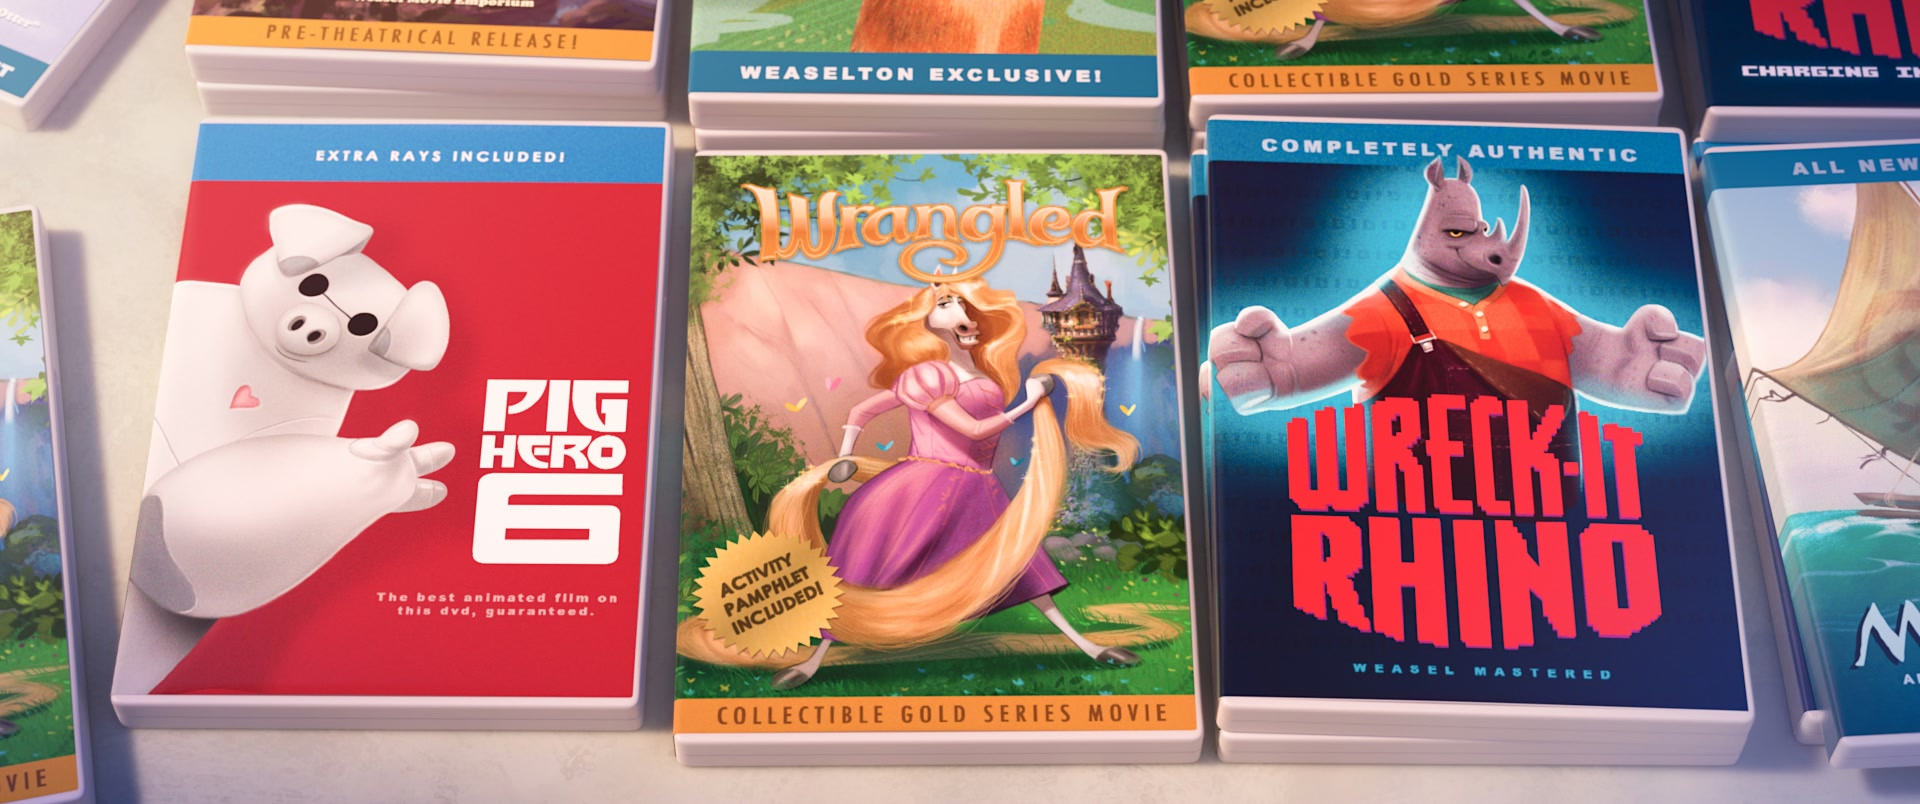 ZOOTOPIA – Easter Eggs: Weaselton Bootleg DVDs of PIG HERO 6, WRANGLED, WRECK-IT RHINO. ©2016 Disney. All Rights Reserved.